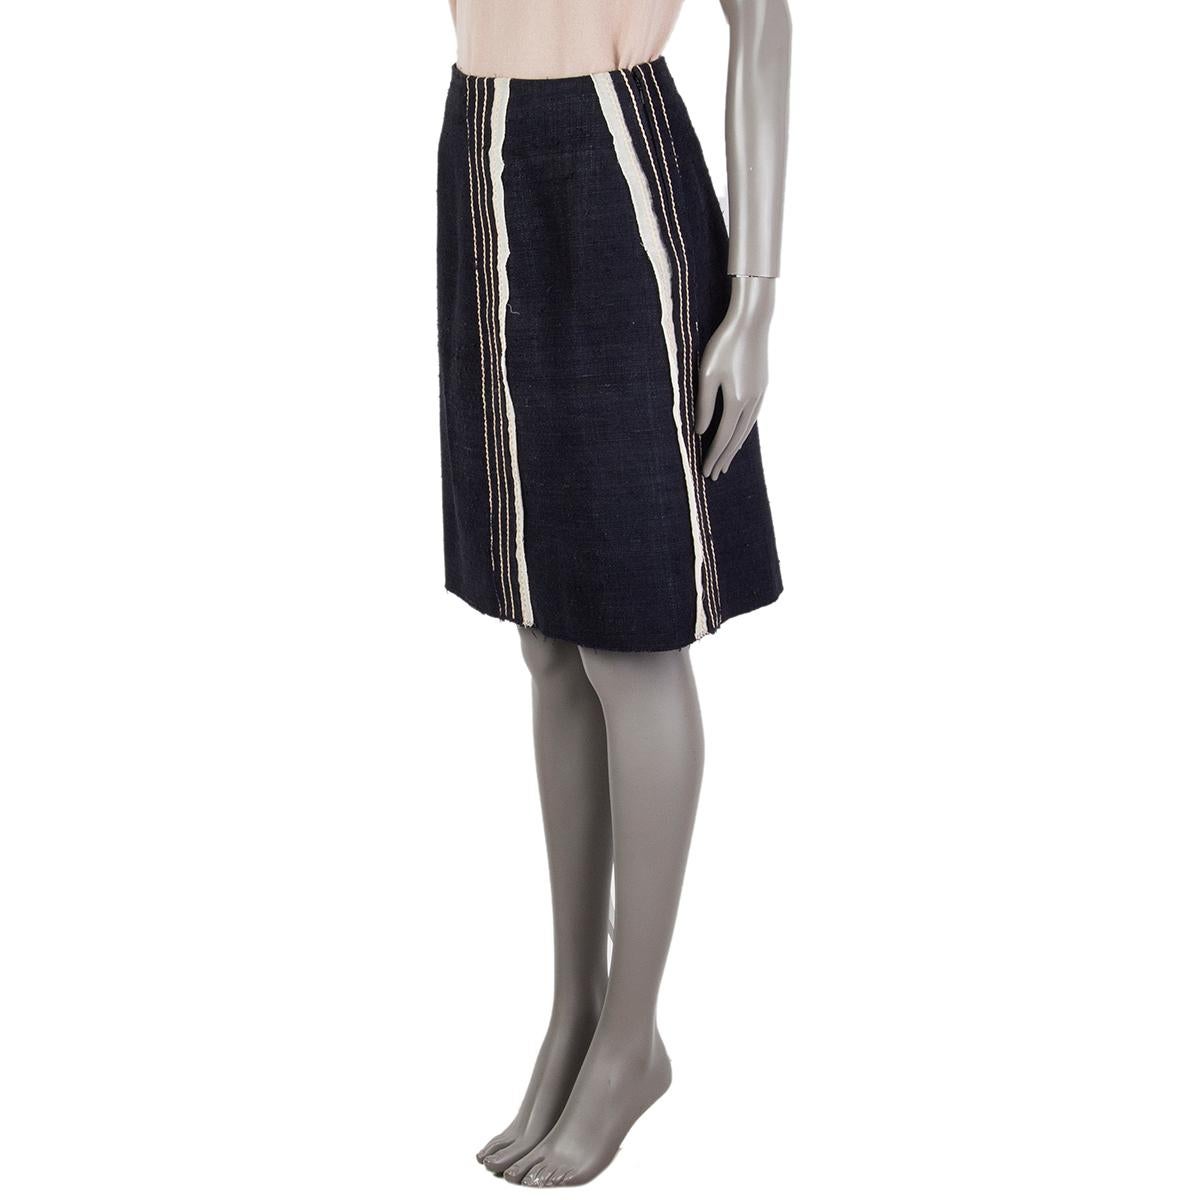 Prada panelled tweed skirt in midnight blue and off-white silk (100%), inserts are cotton (100%) and other trims are cotton (78%), nylon (17%) and elastane (5%). Closes on the back with a concealed zipper. Lined in cupro (60%) and silk (100%). Has